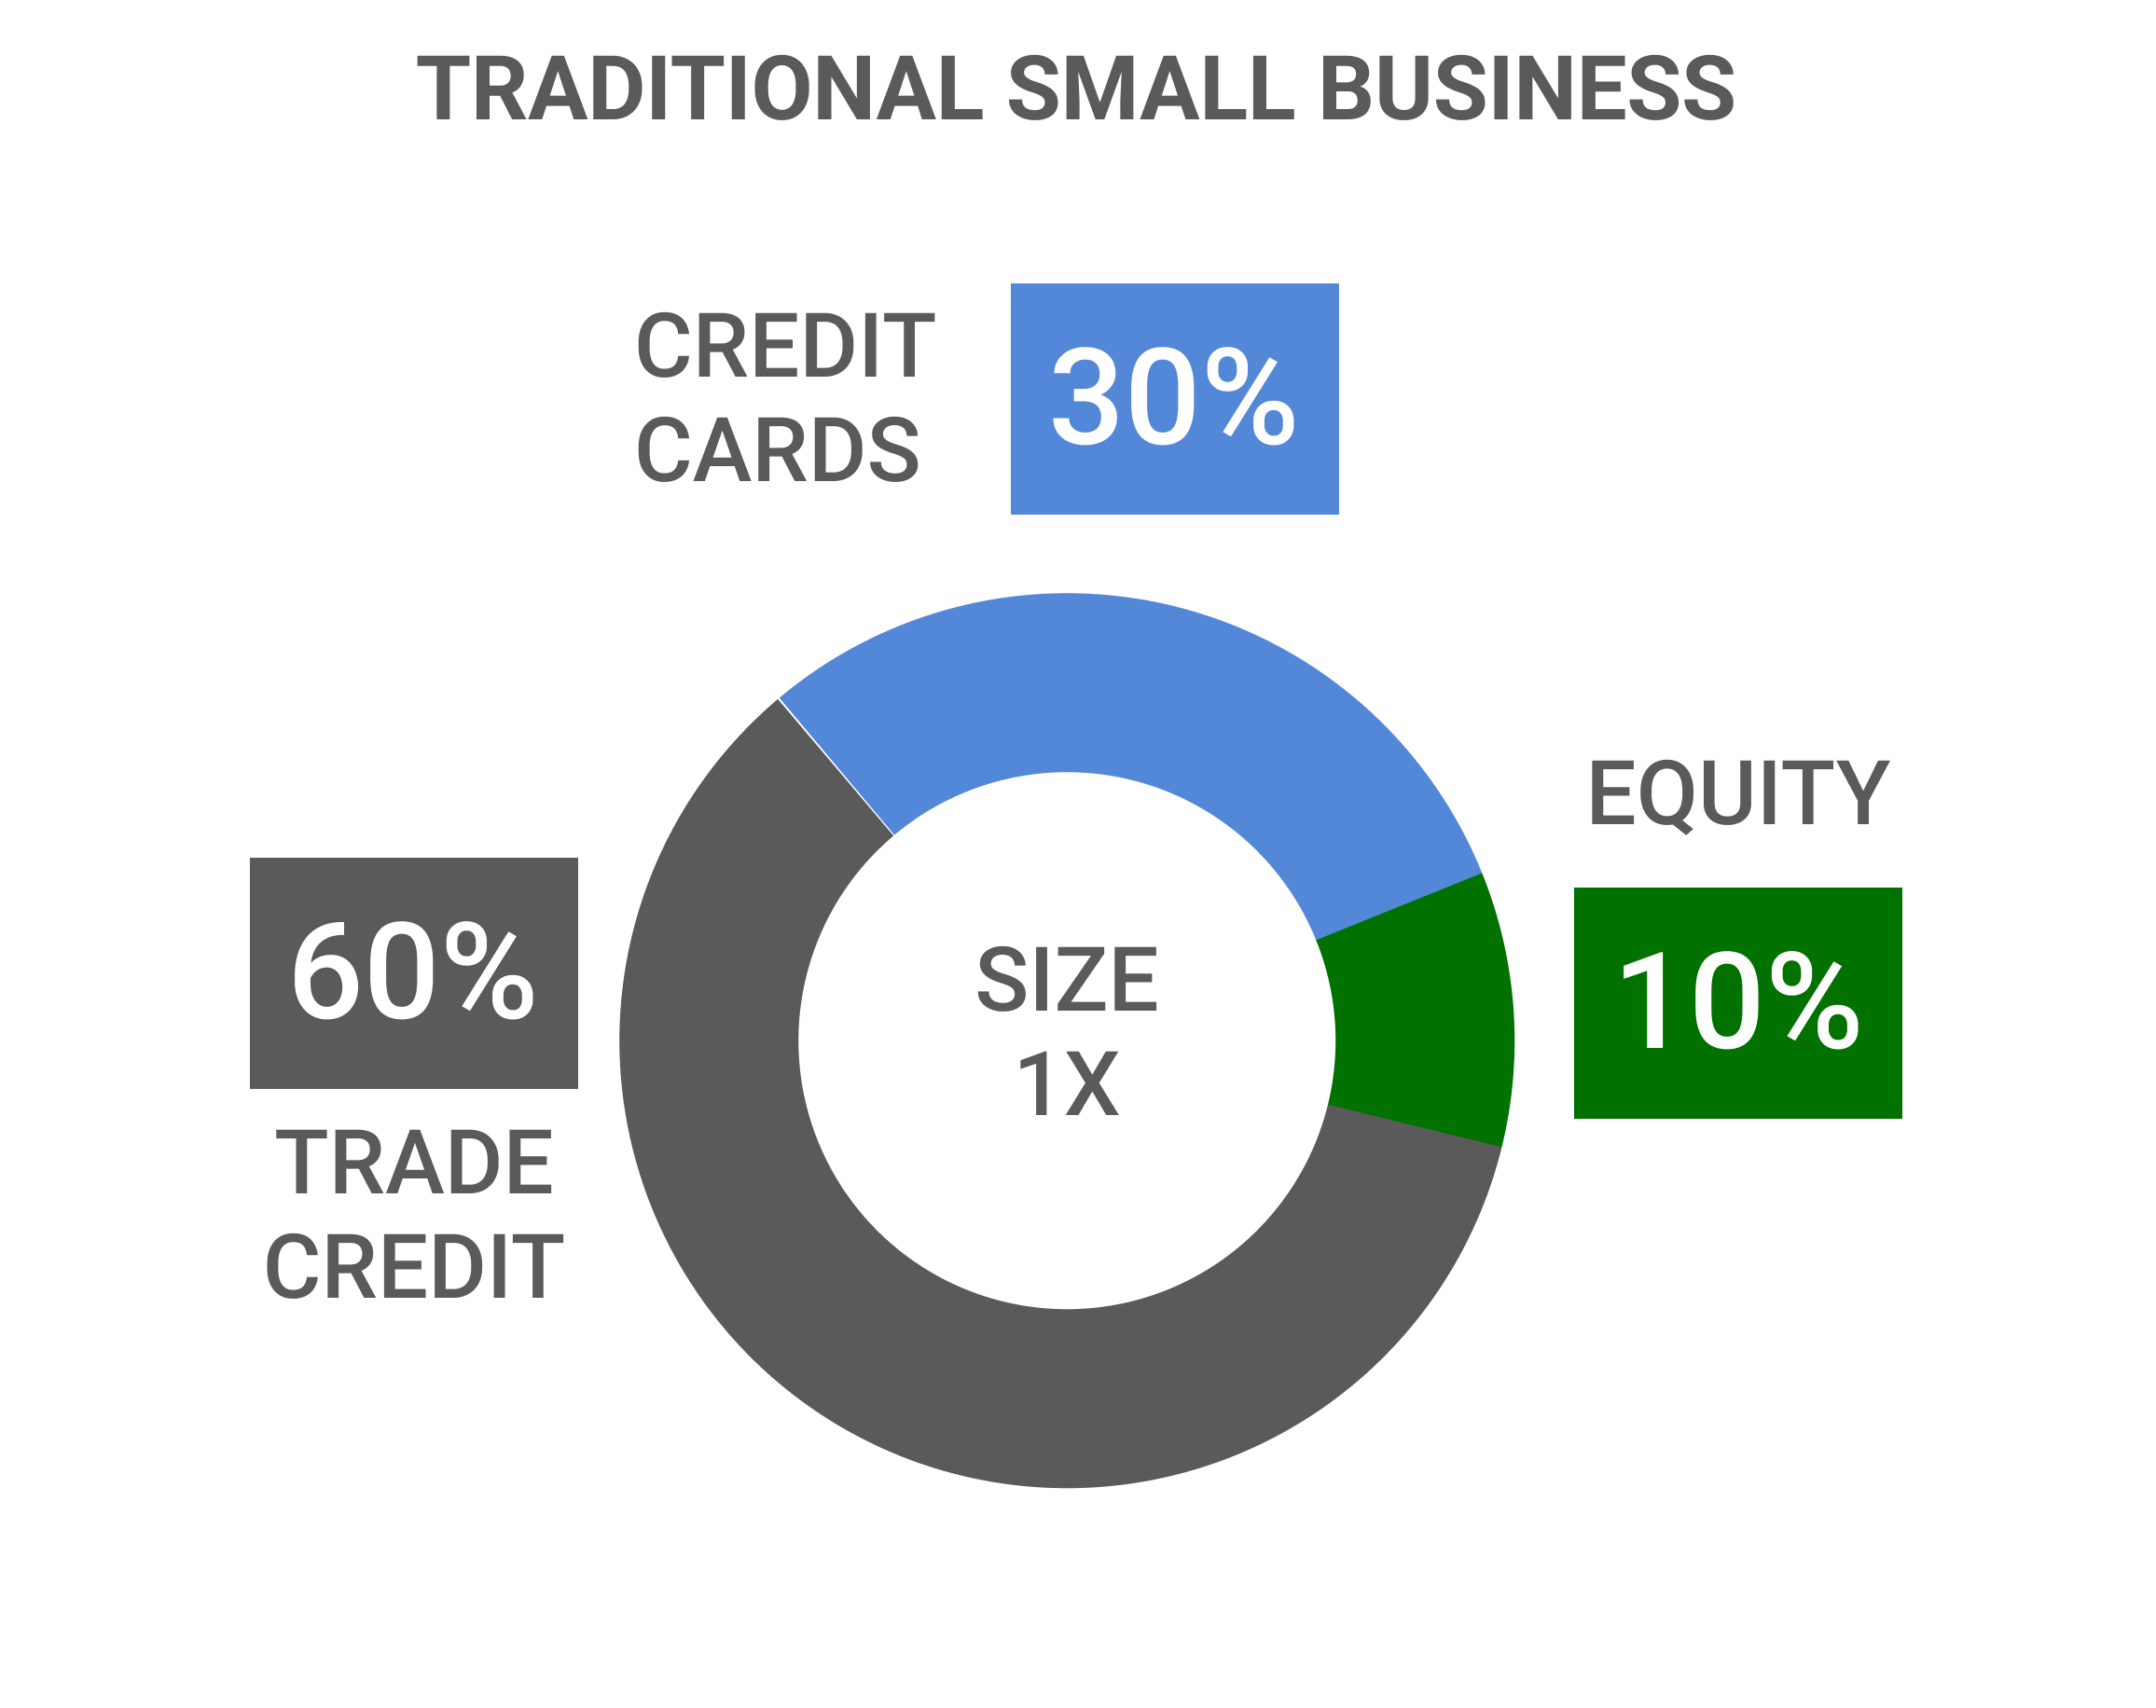 Capitalization of Traditional Small Business is dependent upon credit cards and trade credit both of which are expensive and limits company size and growth